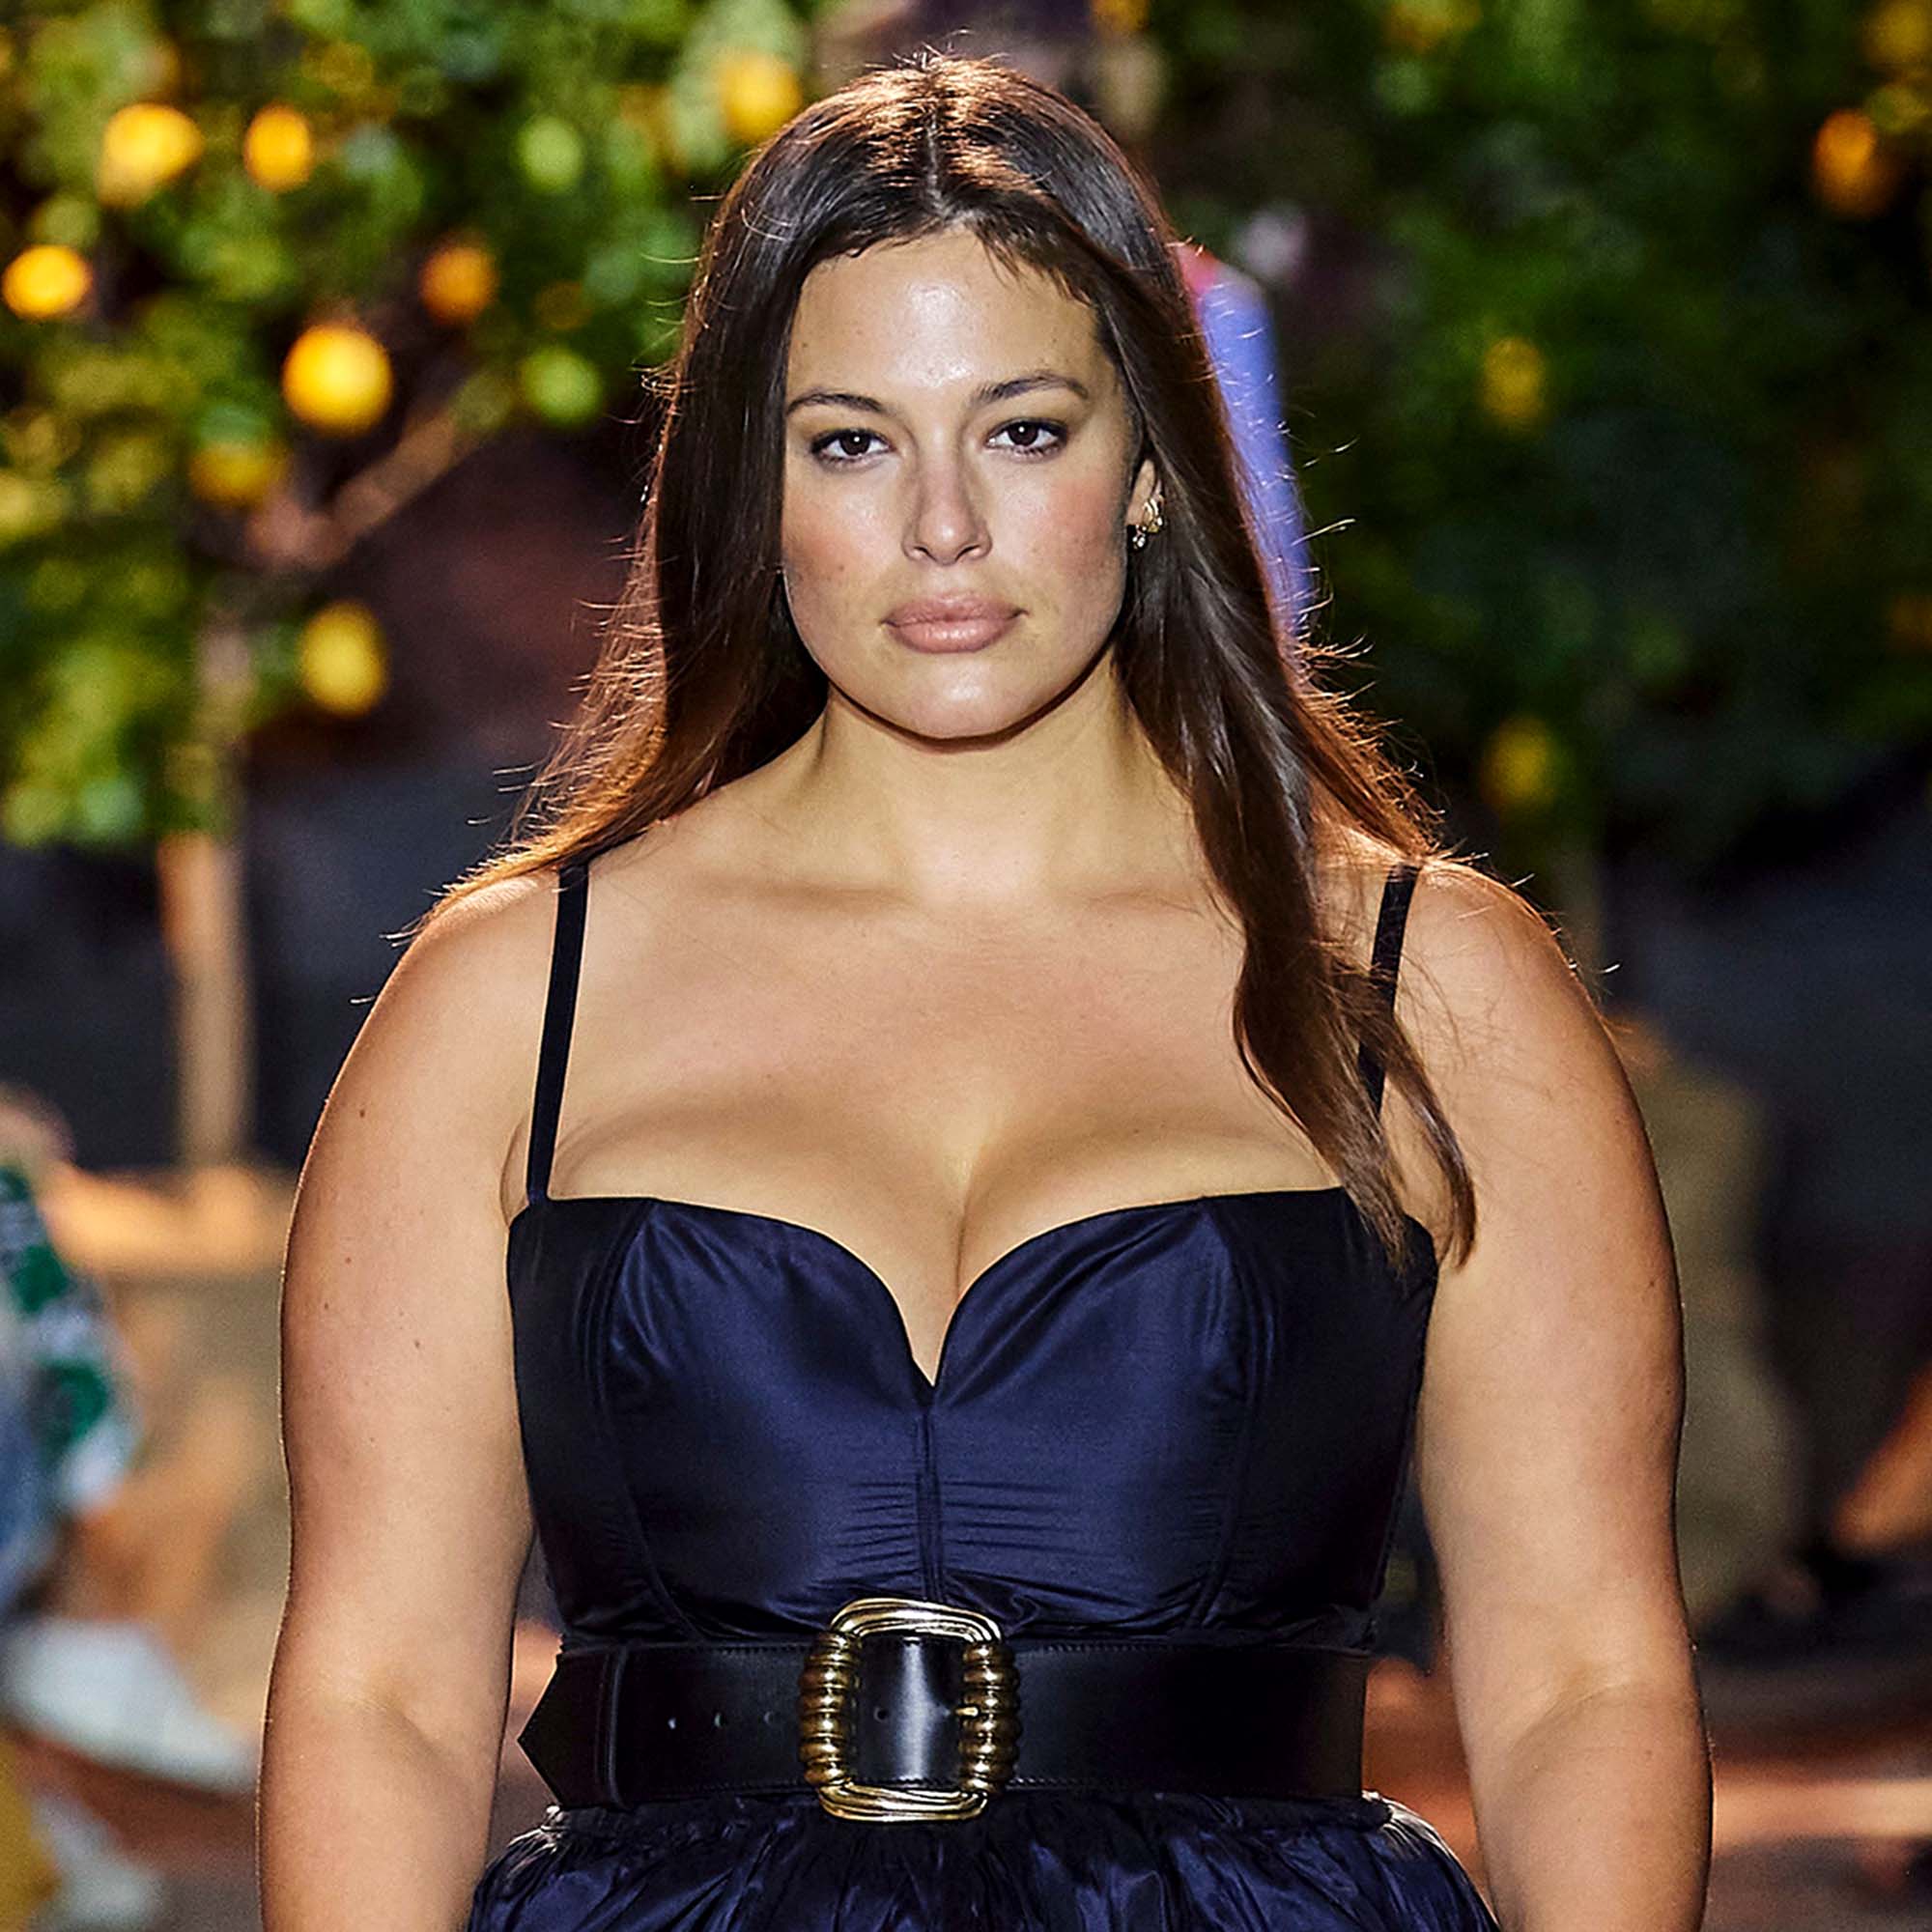 Ashley Graham Gives Birth, Welcomes Twins With Justin Ervin